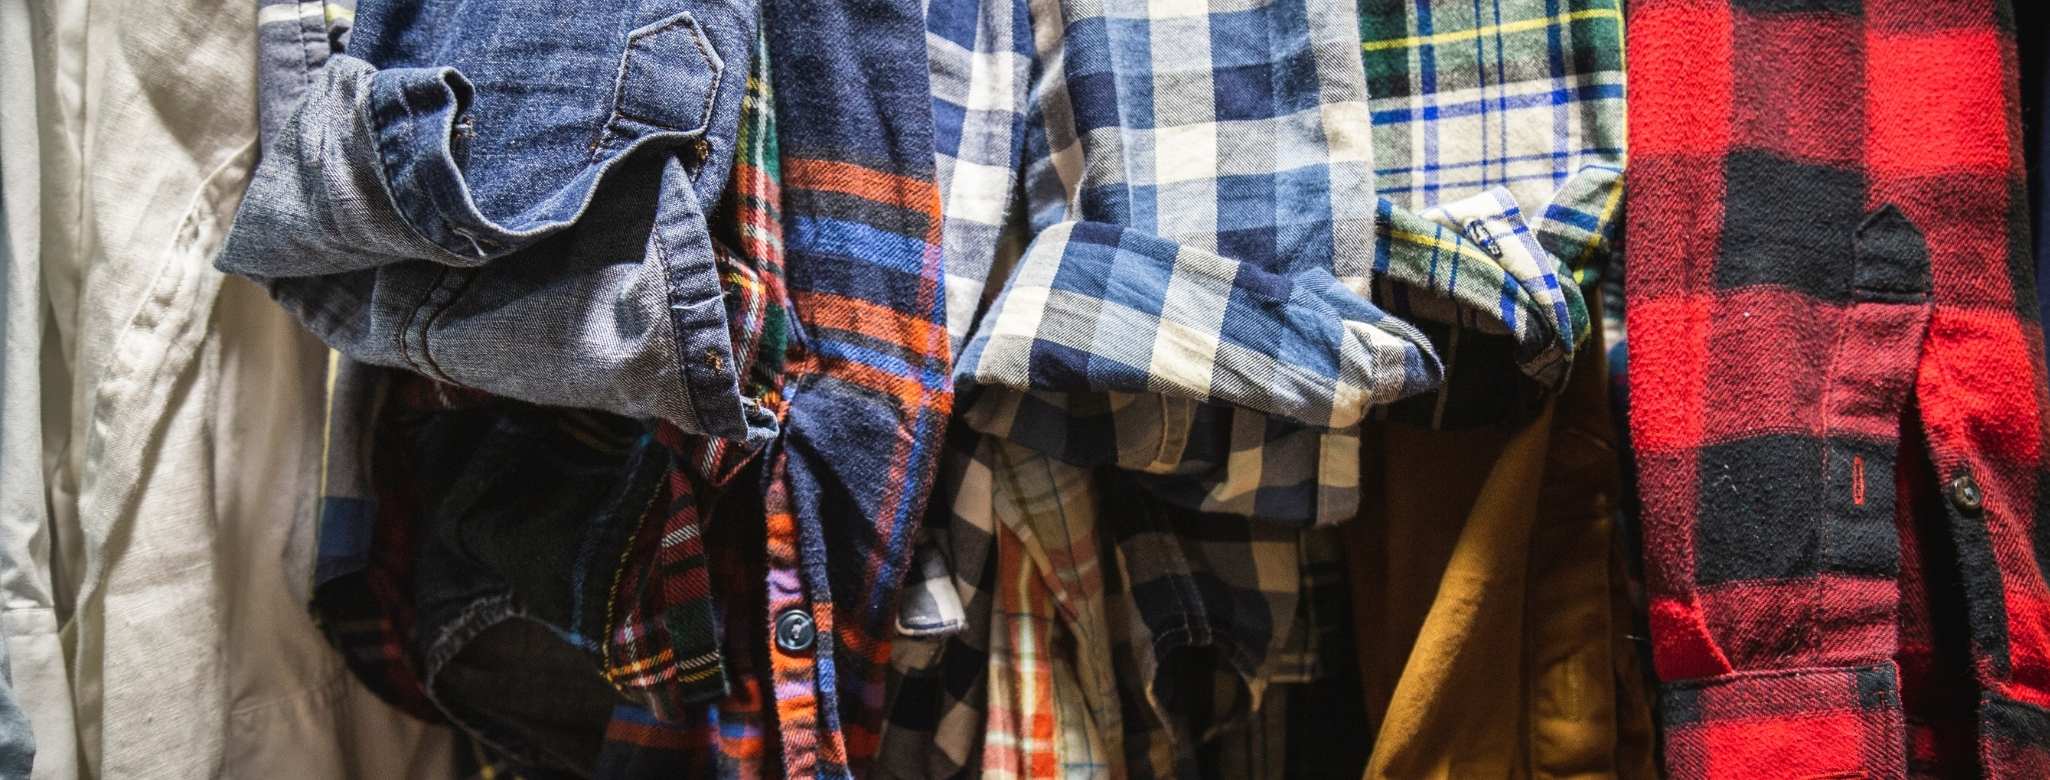 The ultimate list of sustainable clothing brands for men, women, and kids. Plus sized brands and home textiles, too.